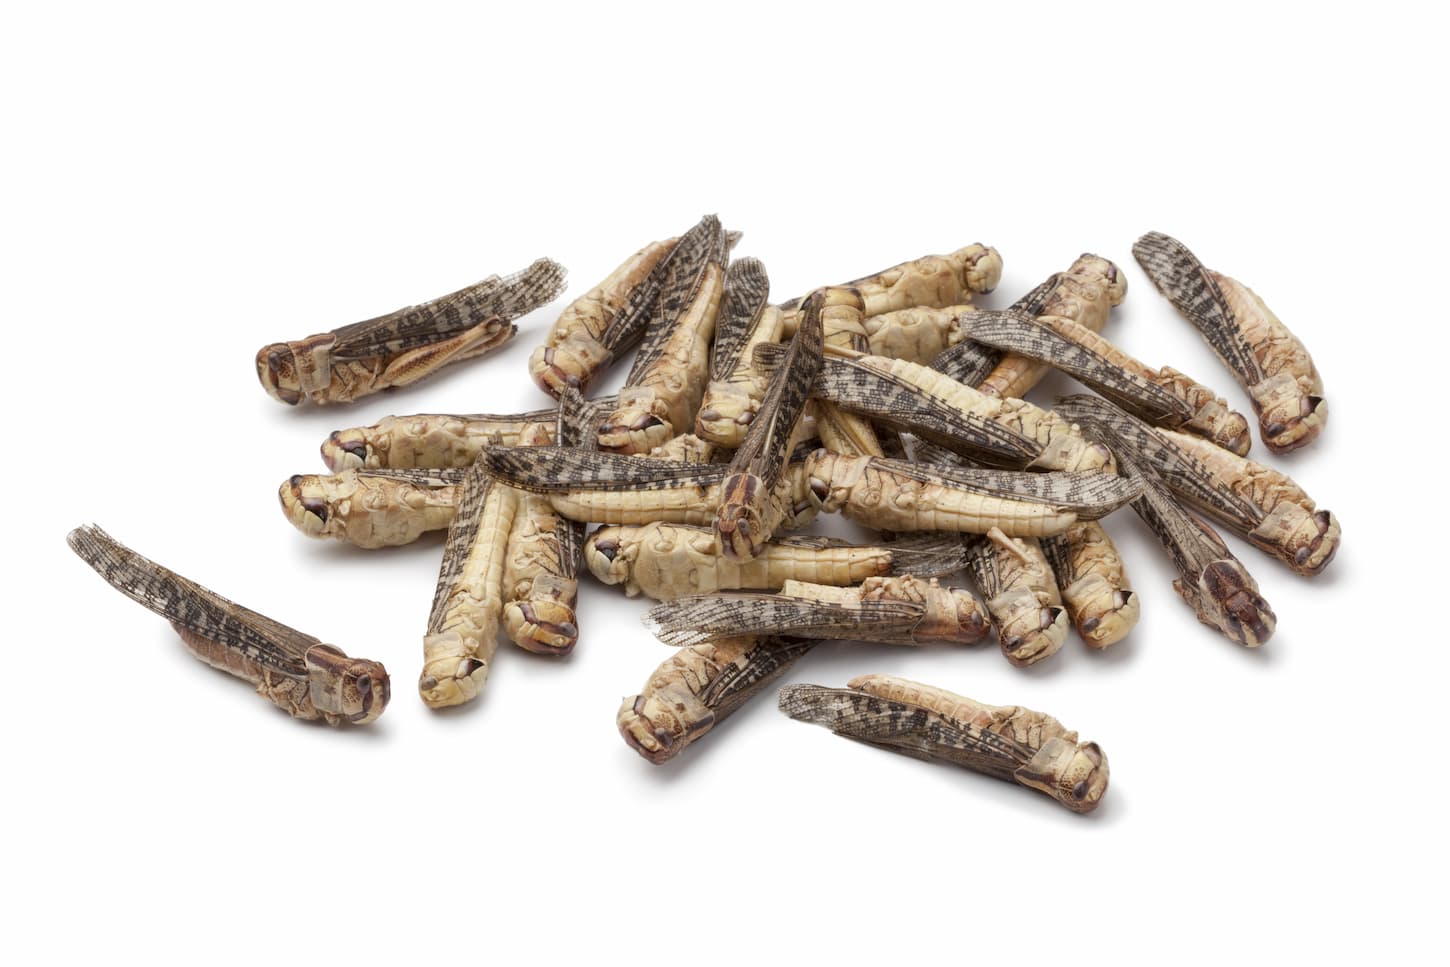 How to Freeze-Dry Insects (Crickets, Mealworms, Worms, etc.)